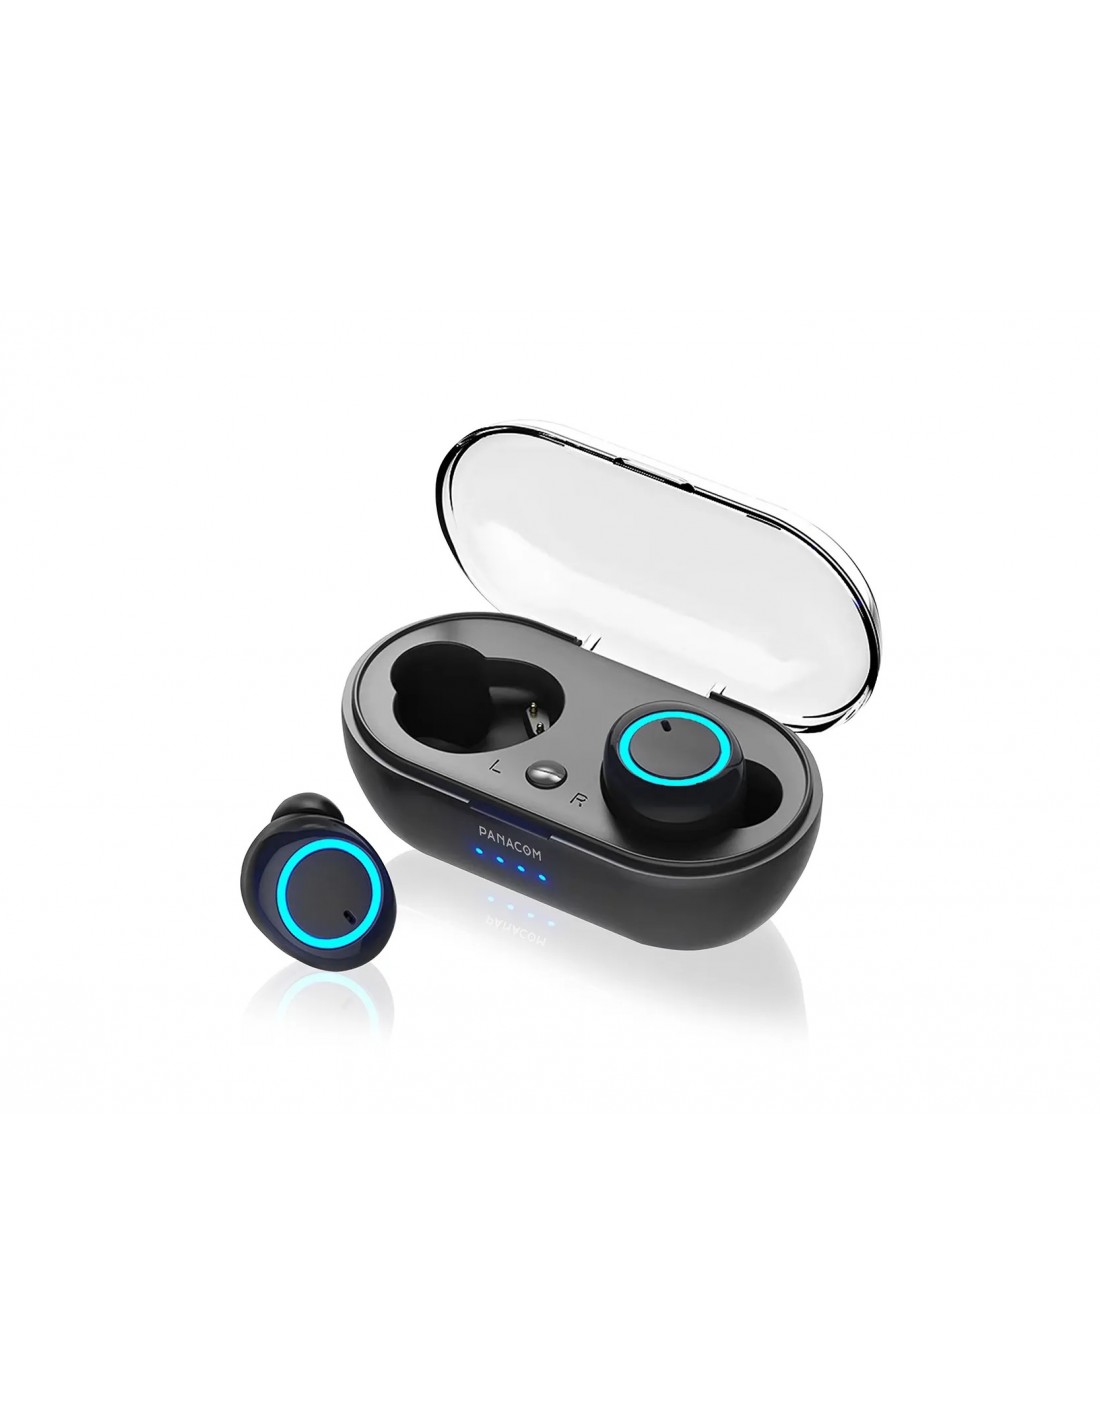 AURICULARES INALAMBRICOS IN EAR BLUETOOTH TIME AU-1323